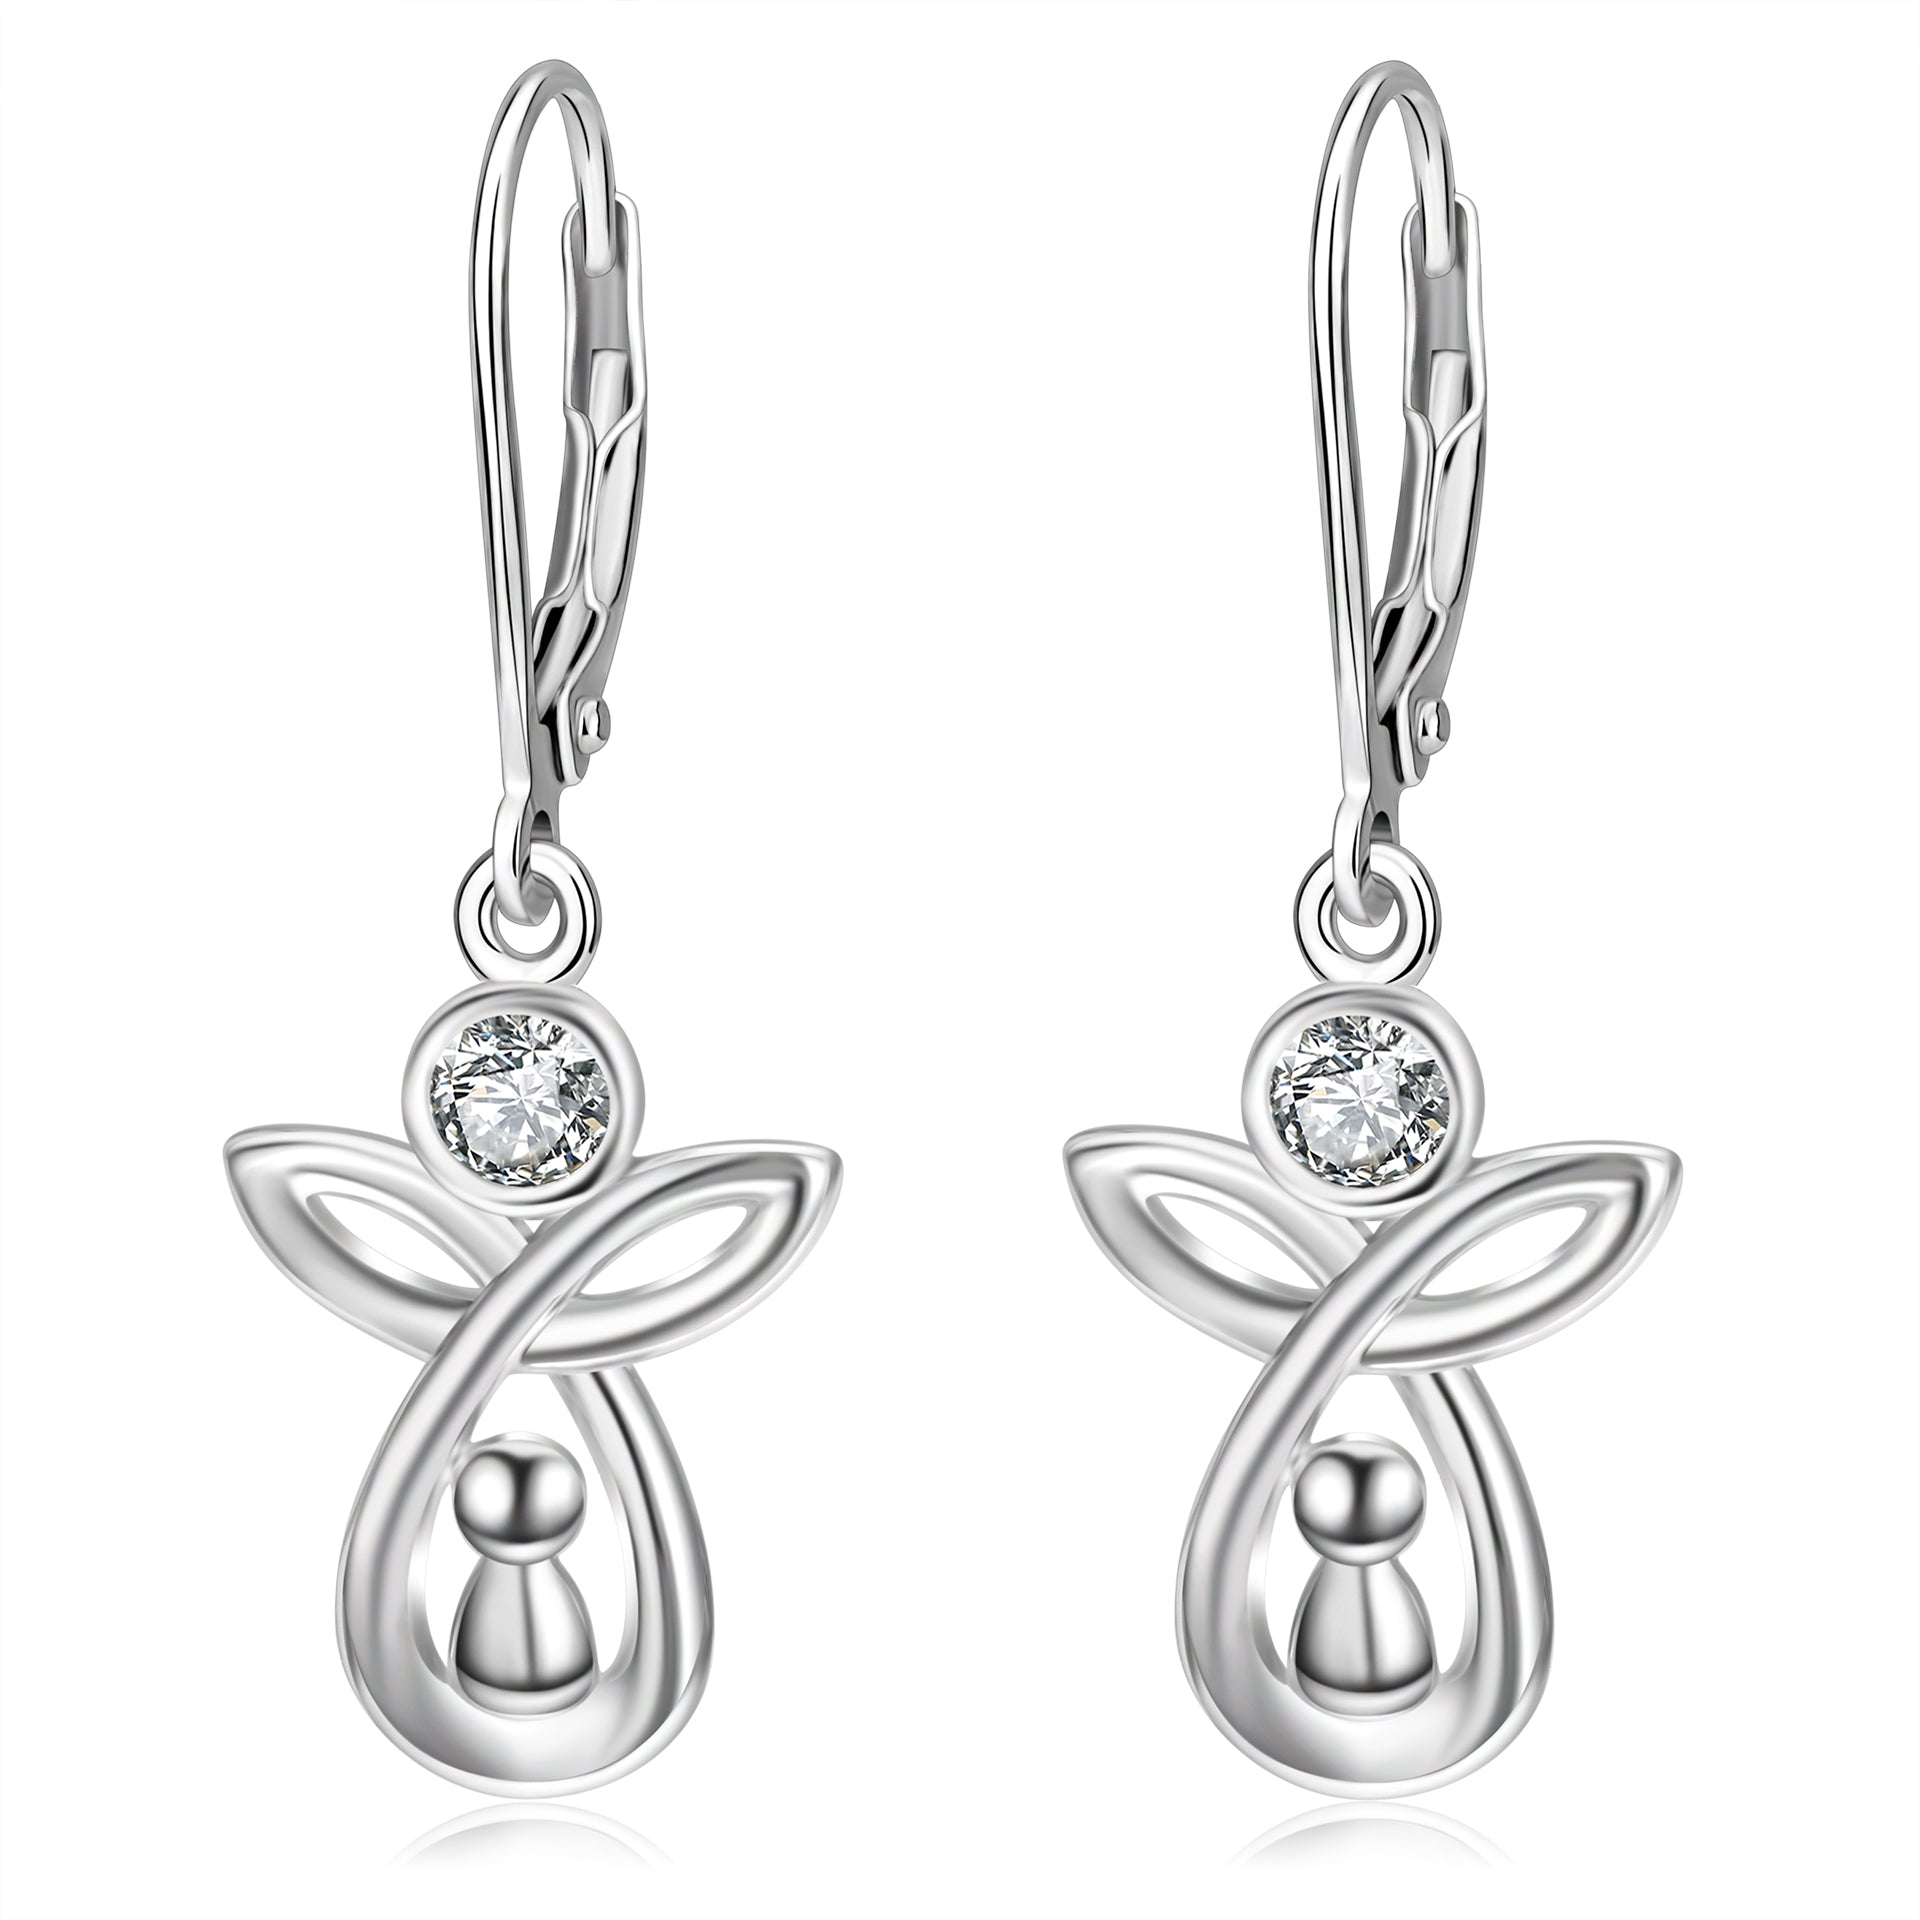 Smart Earrings White Gold Plated Earrings With Angel